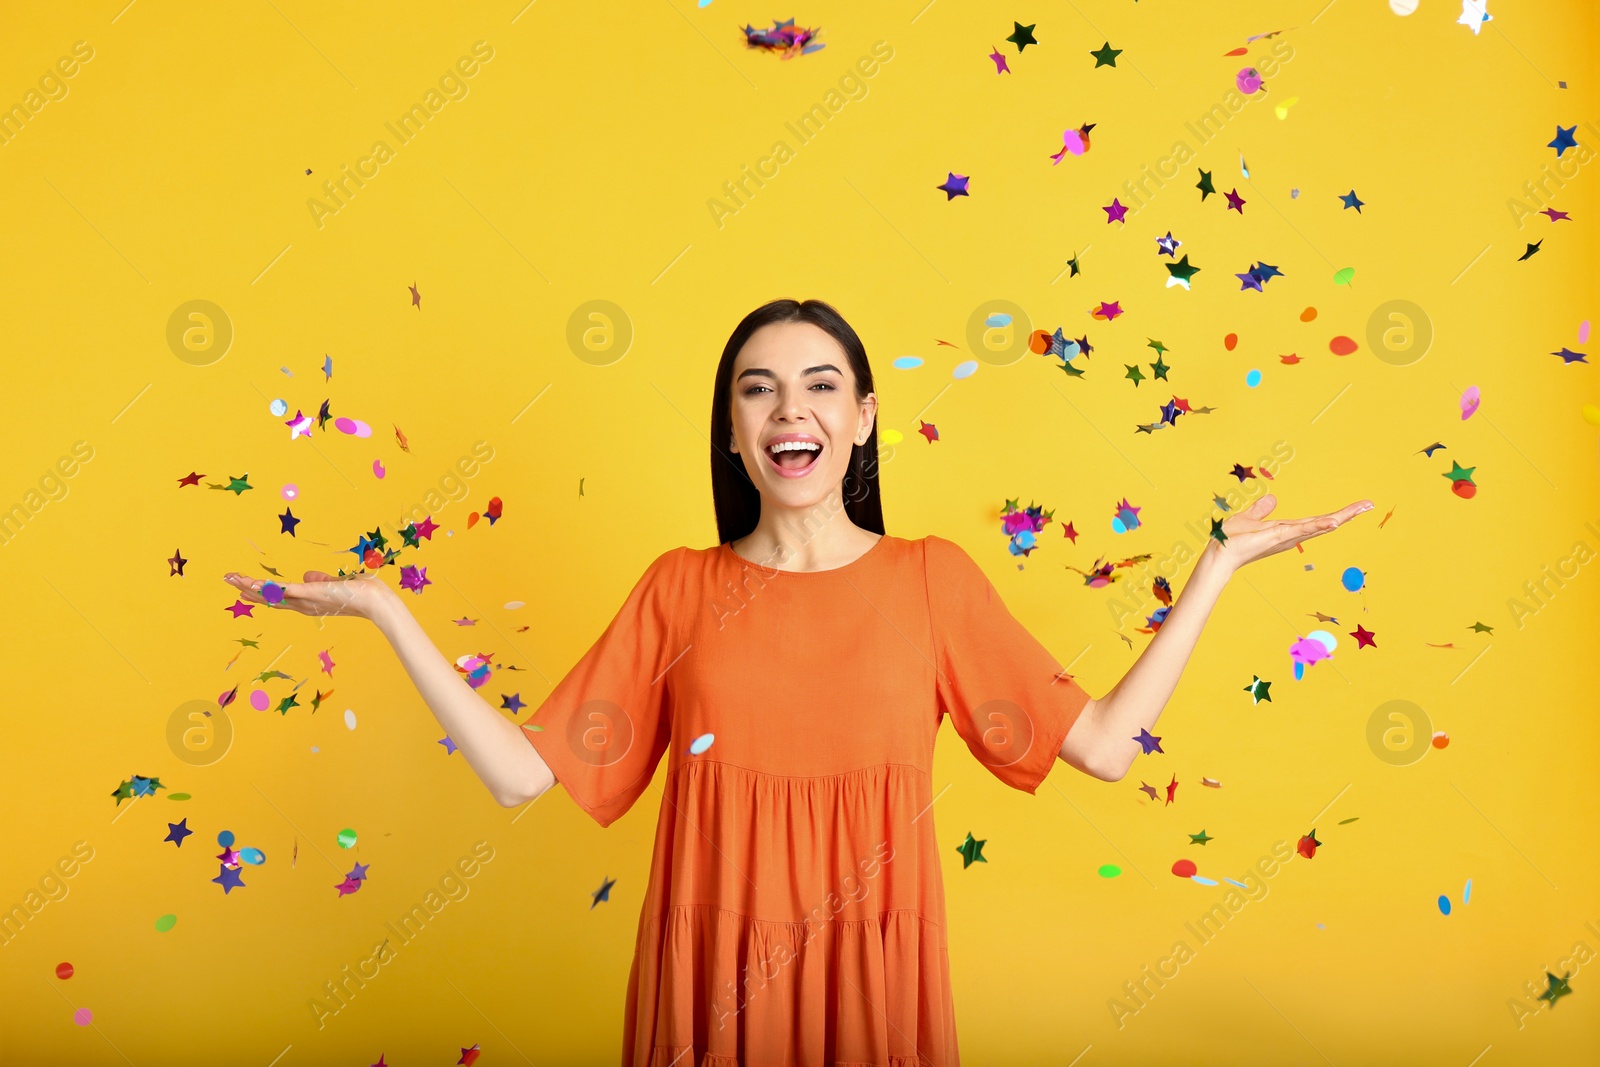 Photo of Emotional woman and falling confetti on yellow background